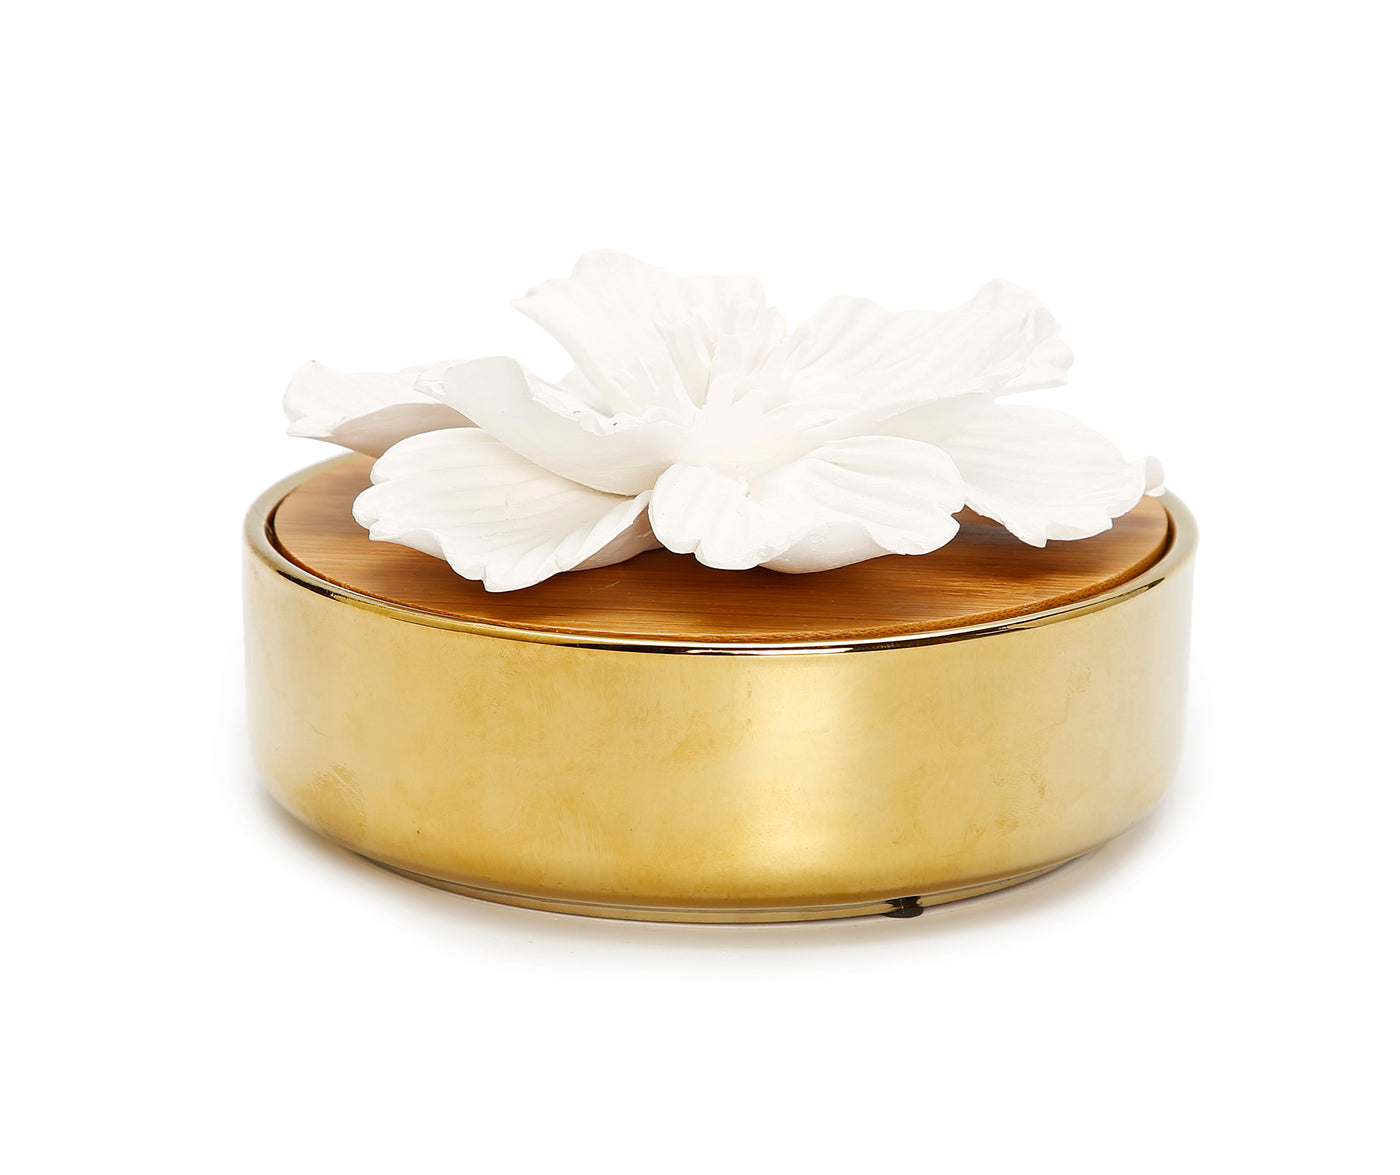 Glossy Gold Hemispheric shaped Diffuser with White Flower, "English Pear & Freesia" Scent